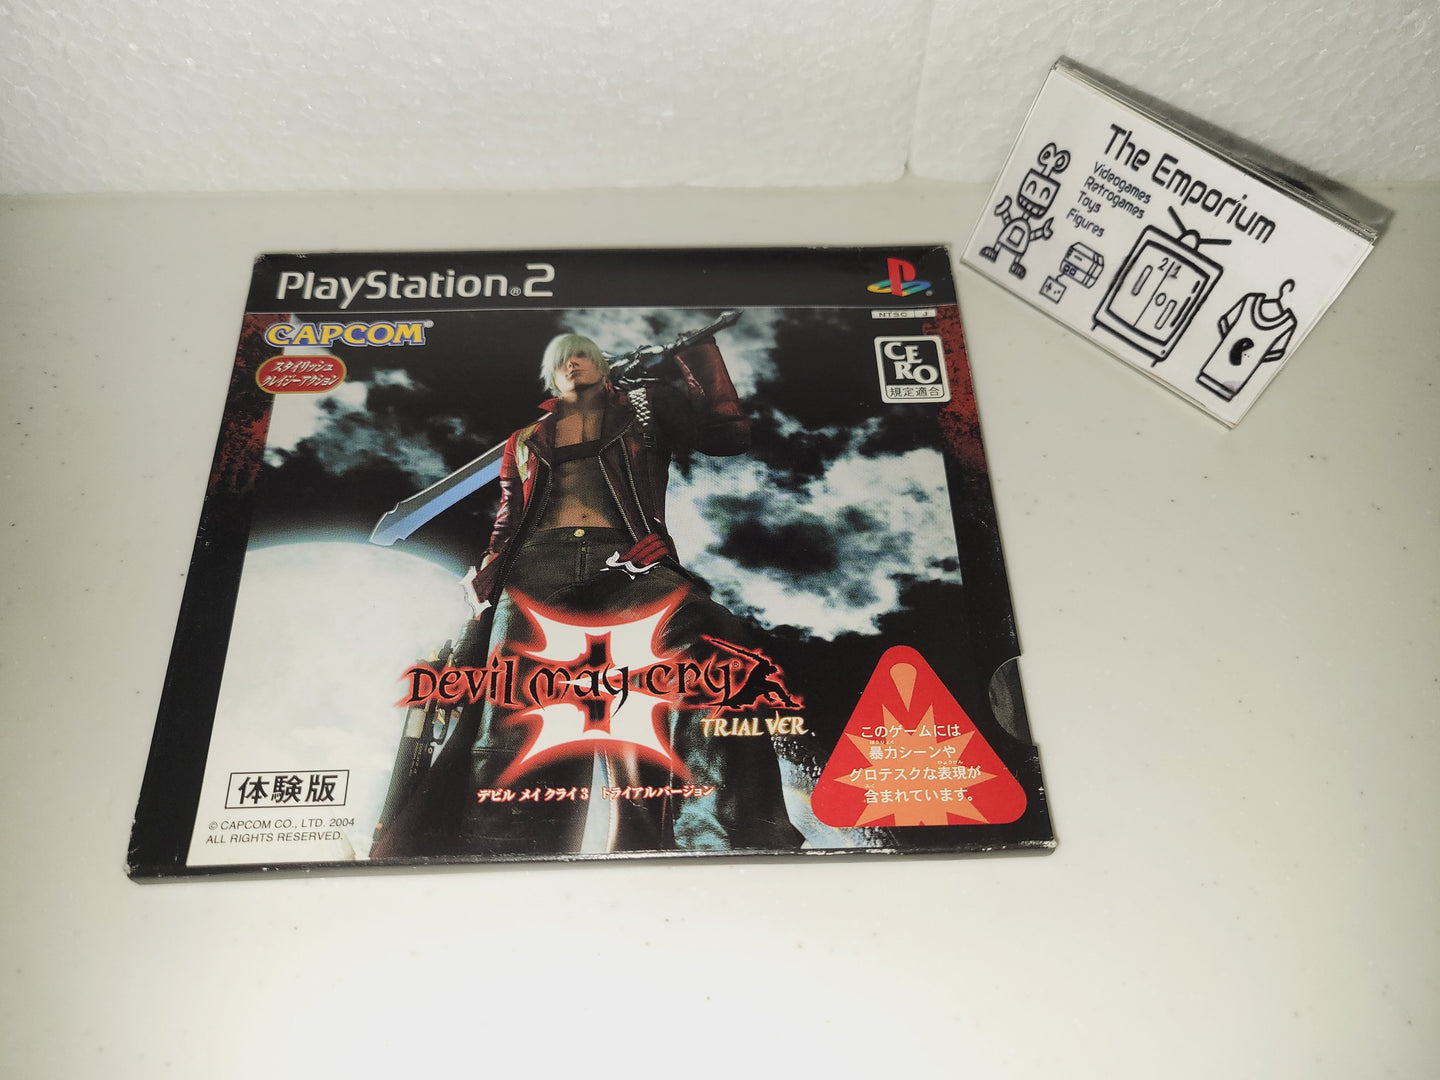 Devil May Cry 3 Trial Version - Sony playstation 2